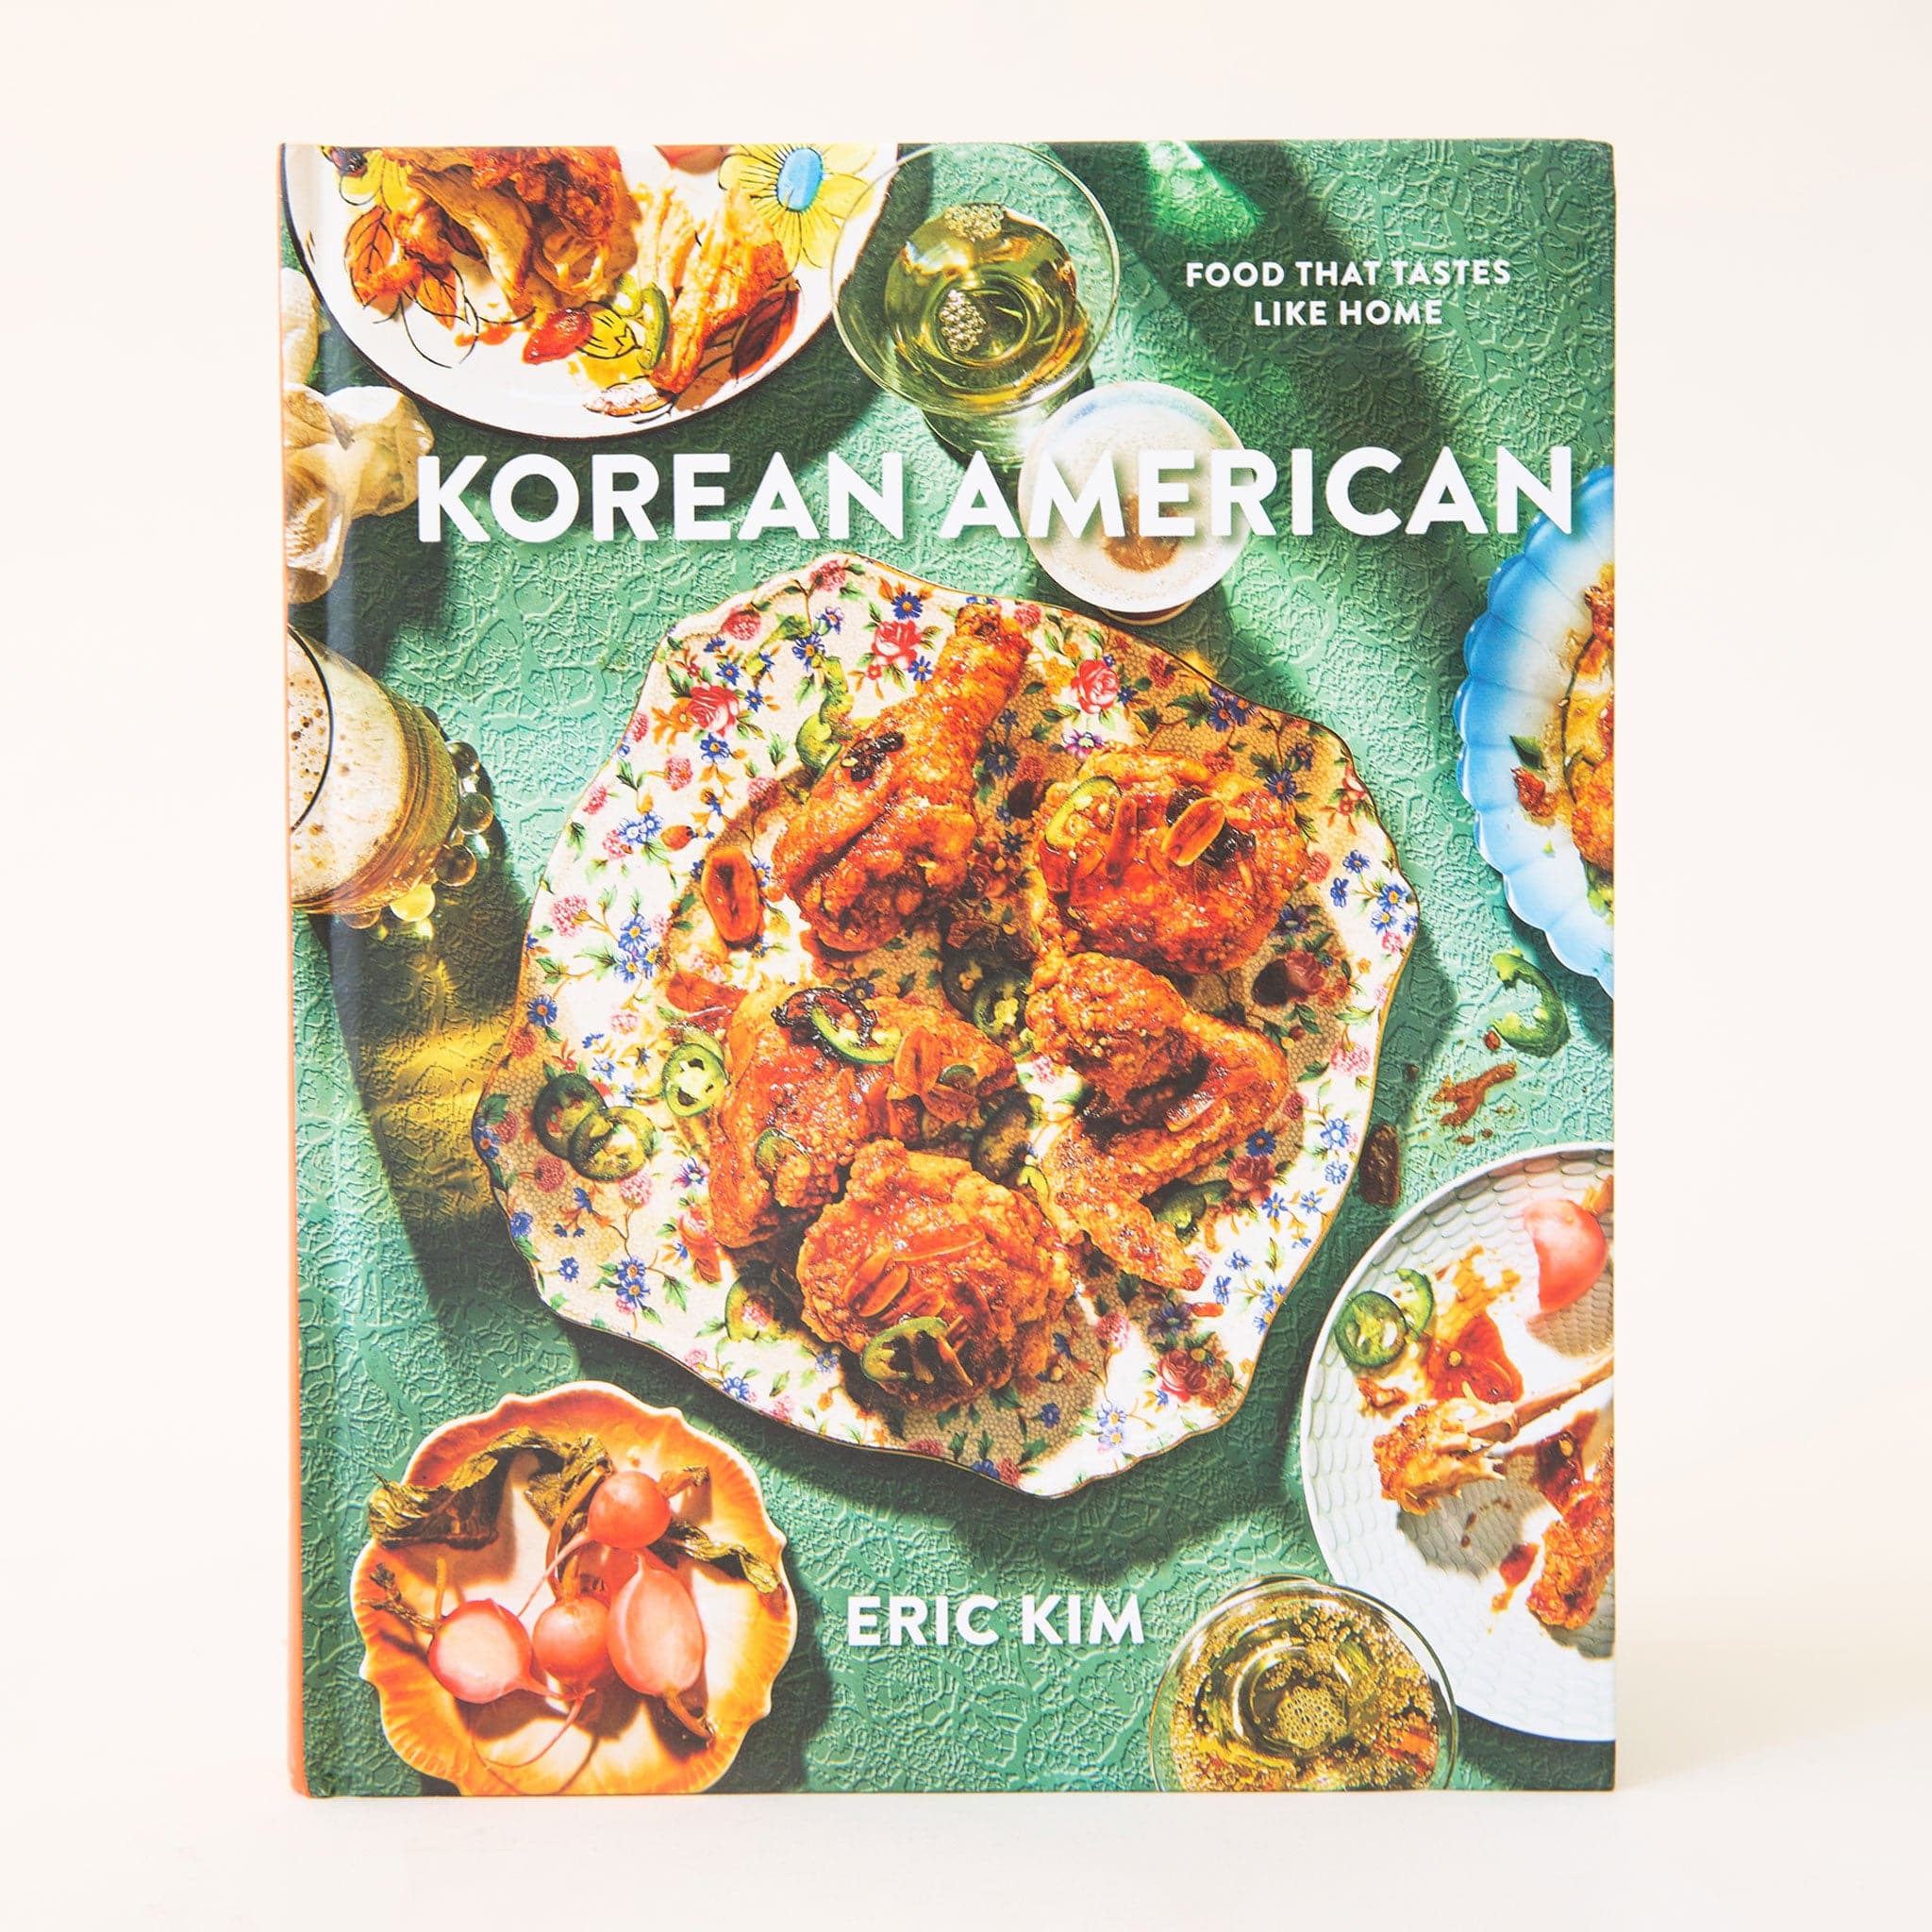 Hard cover cookbook titled &#39;Korean American&#39; in white bold lettering. The cover is filled with colorful dishes of beautifully curated meals. The plates lay against a sea green textured background. 